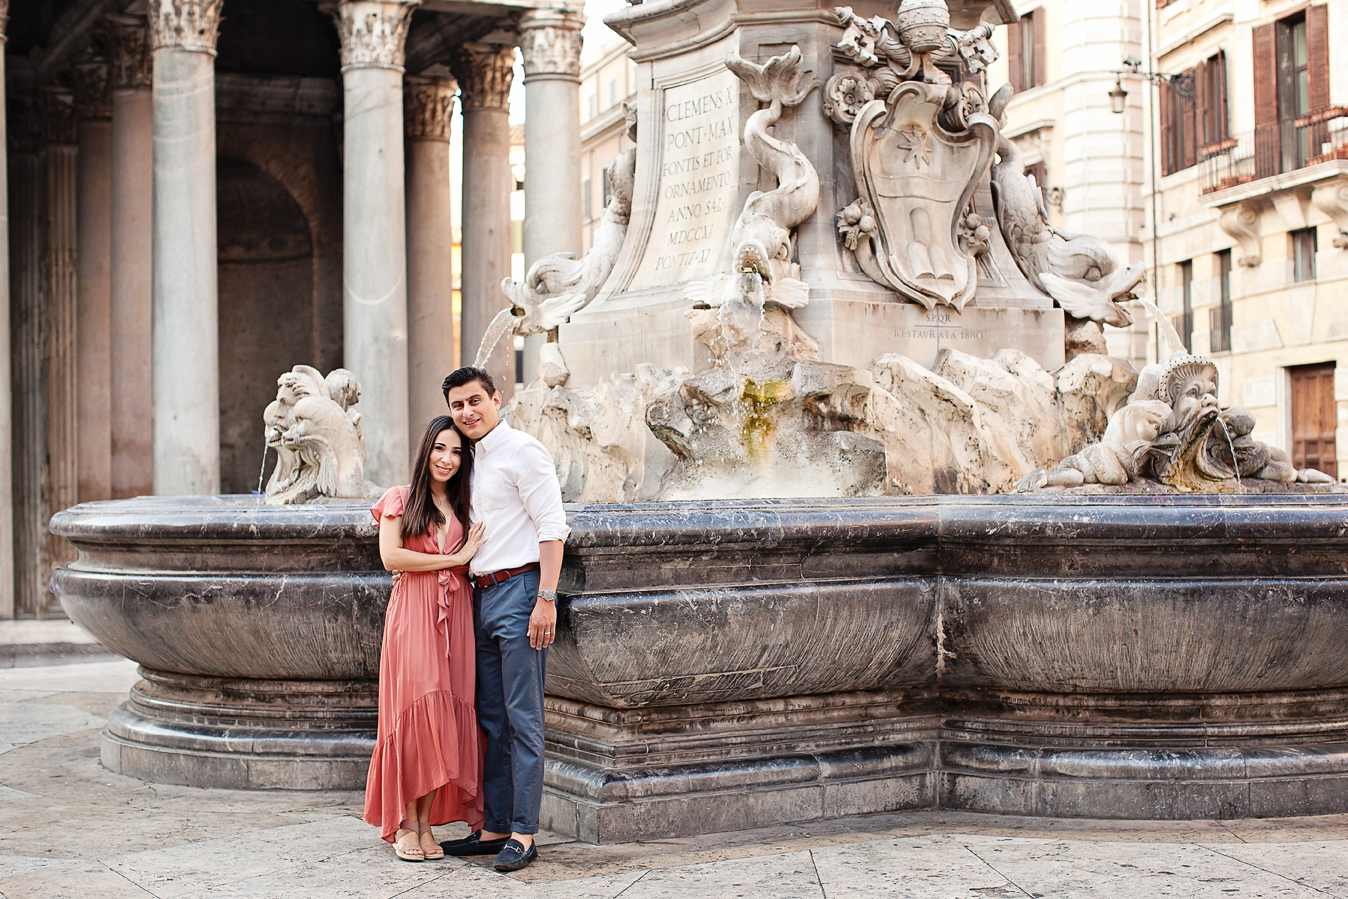 Honeymoon, vacation, family, engagement, maternity, wedding, love story individual and solo photoshoots in Rome, Italy by photographer Tricia Anne Photography | Rome Photographer, vacation, Rome Anniversary Photoshoot, Pantheon, piazza Navona, Centro Storico Photo Shoot, photo shoot in rome, Rome Vacation Photographer, English speaking photographer in Rome